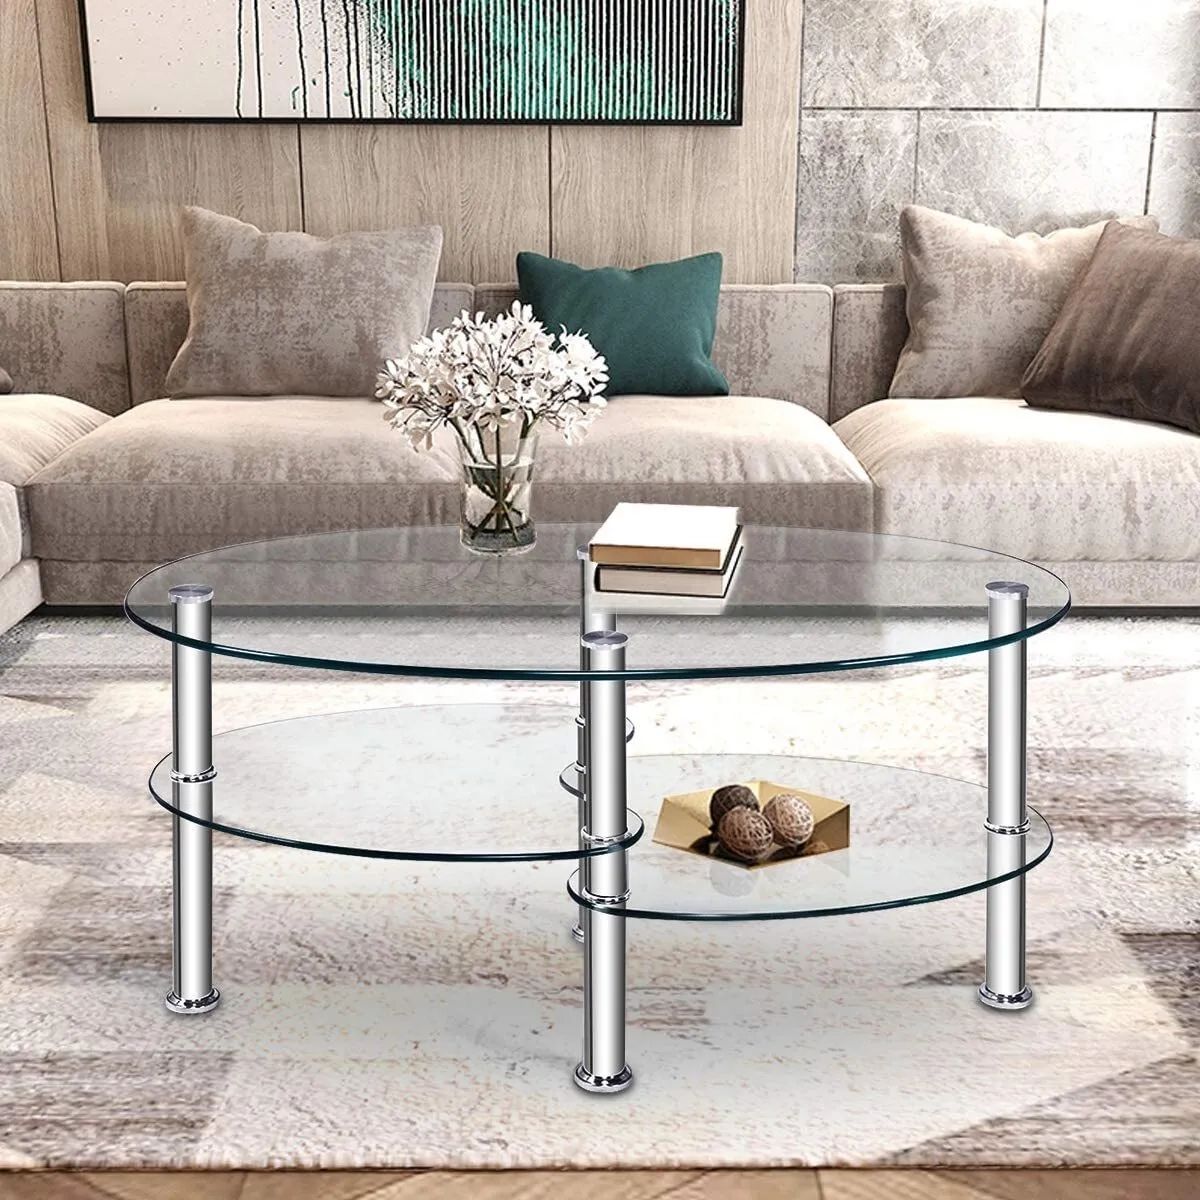 3 Tier Tempered Glass Oval Side Coffee Table Shelf Chrome Base Living Room  Home | Ebay In Tempered Glass Oval Side Tables (View 4 of 15)